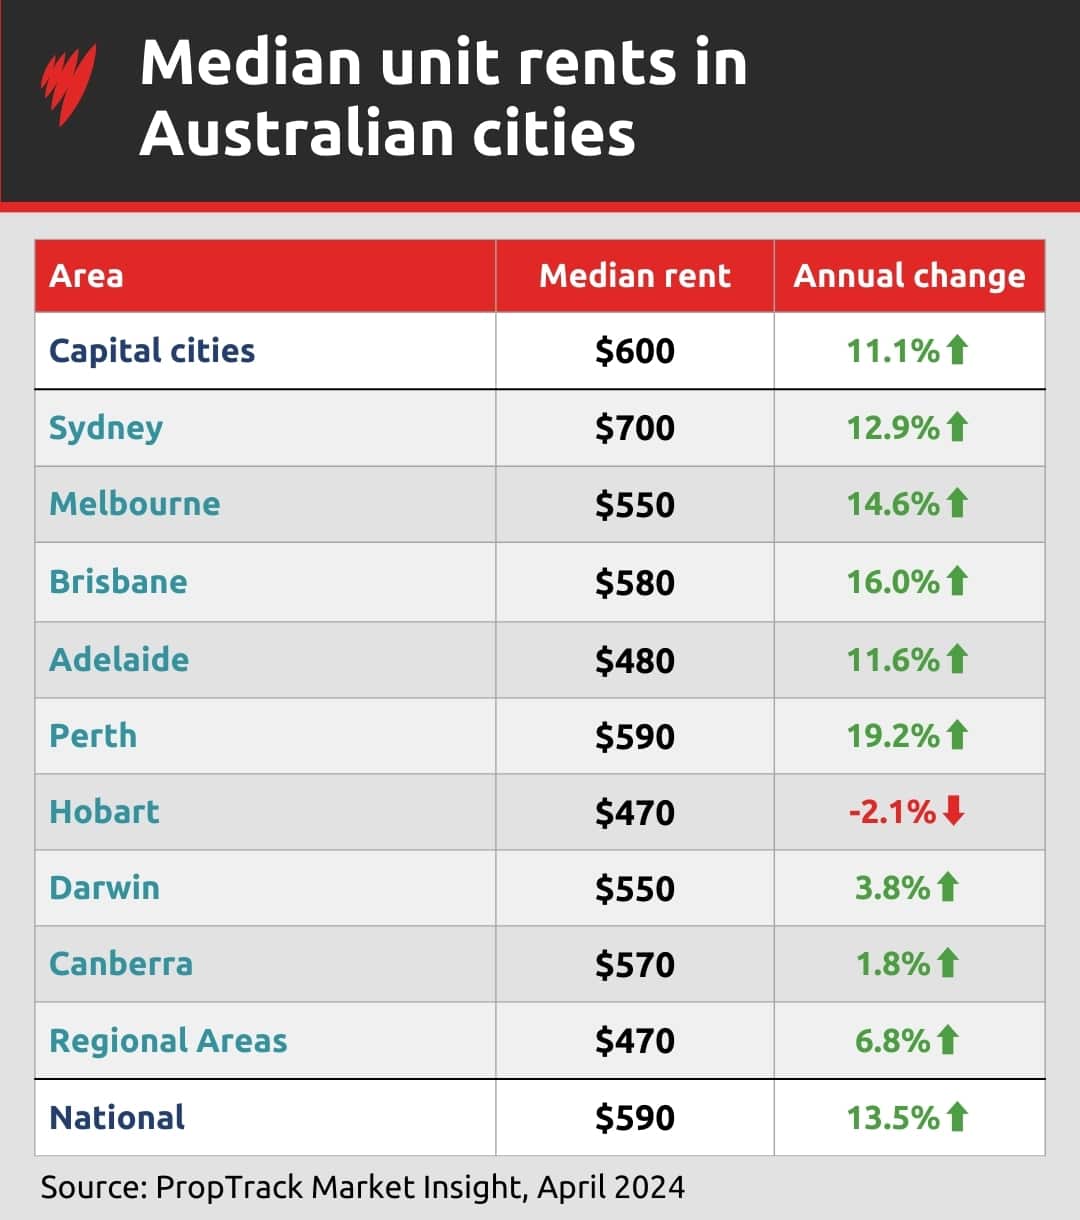 Table showing the median prices of rental units in Australian cities.